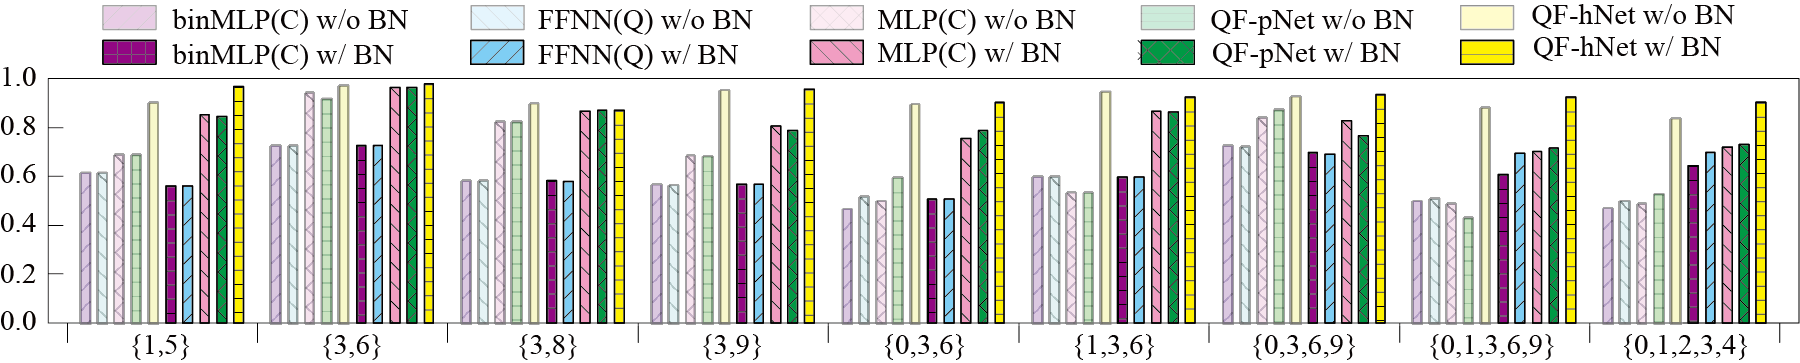 QF-Nets achieve high accuracy in image classifications on different sub-datasets of MNIST.